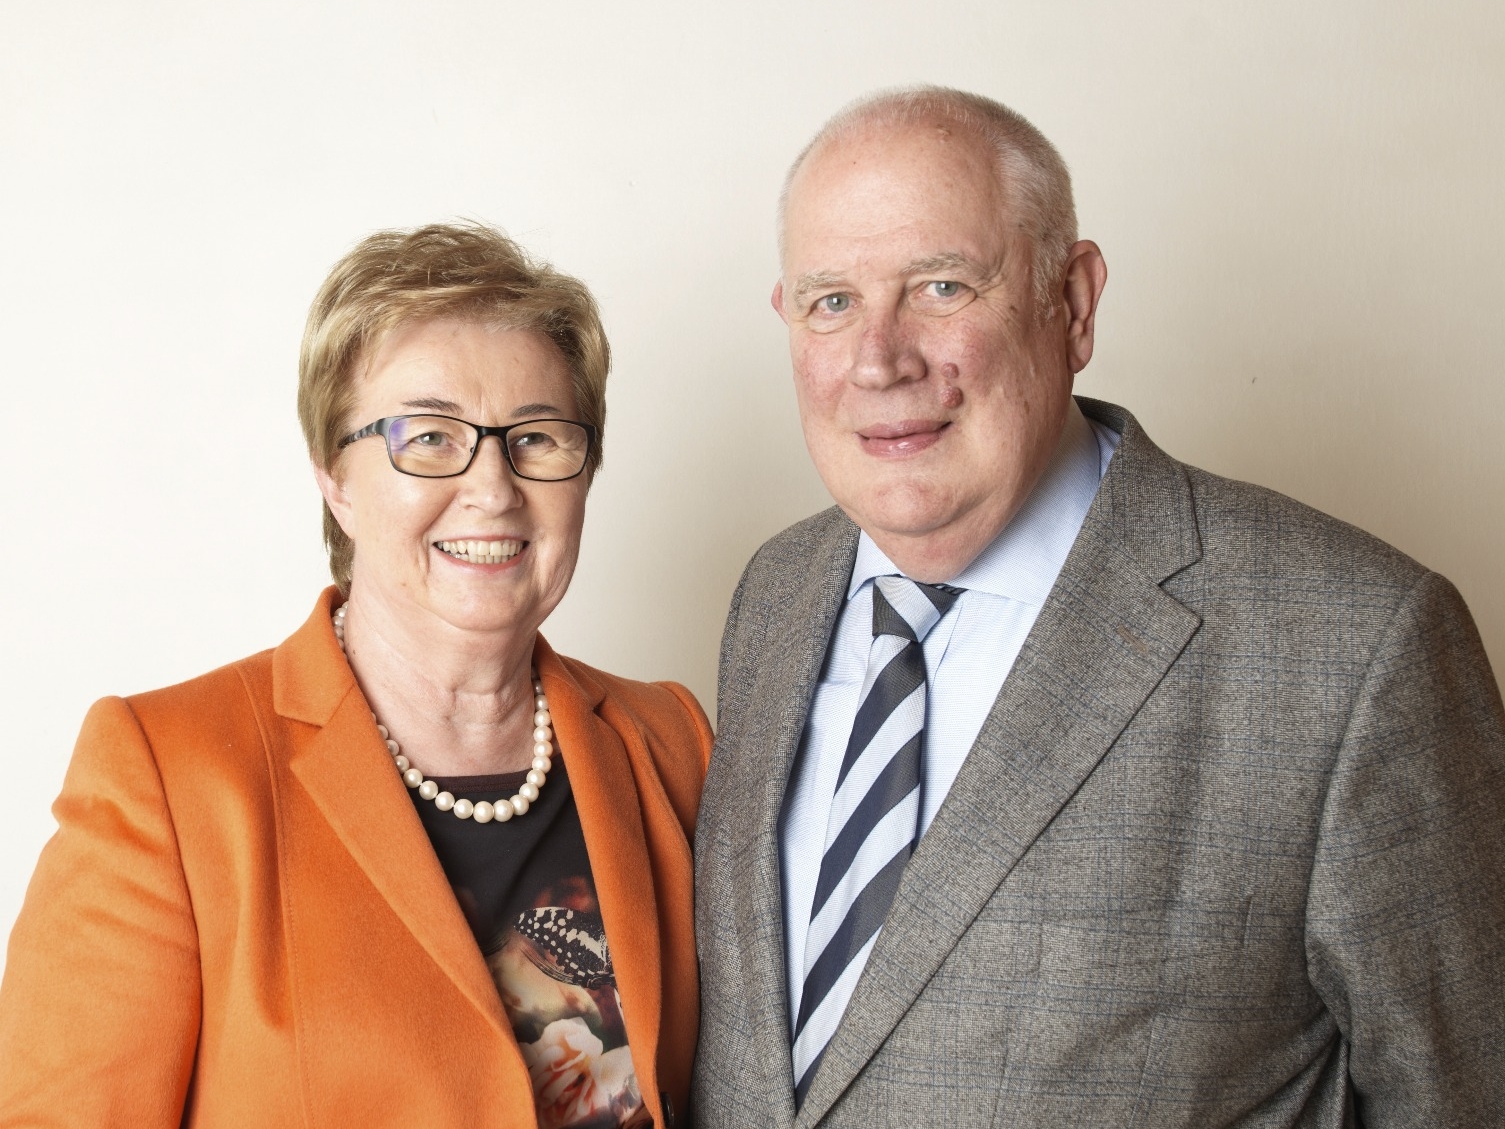 ANNEMIE AND KAREL STERcKX: A FAMILY BUSINESS